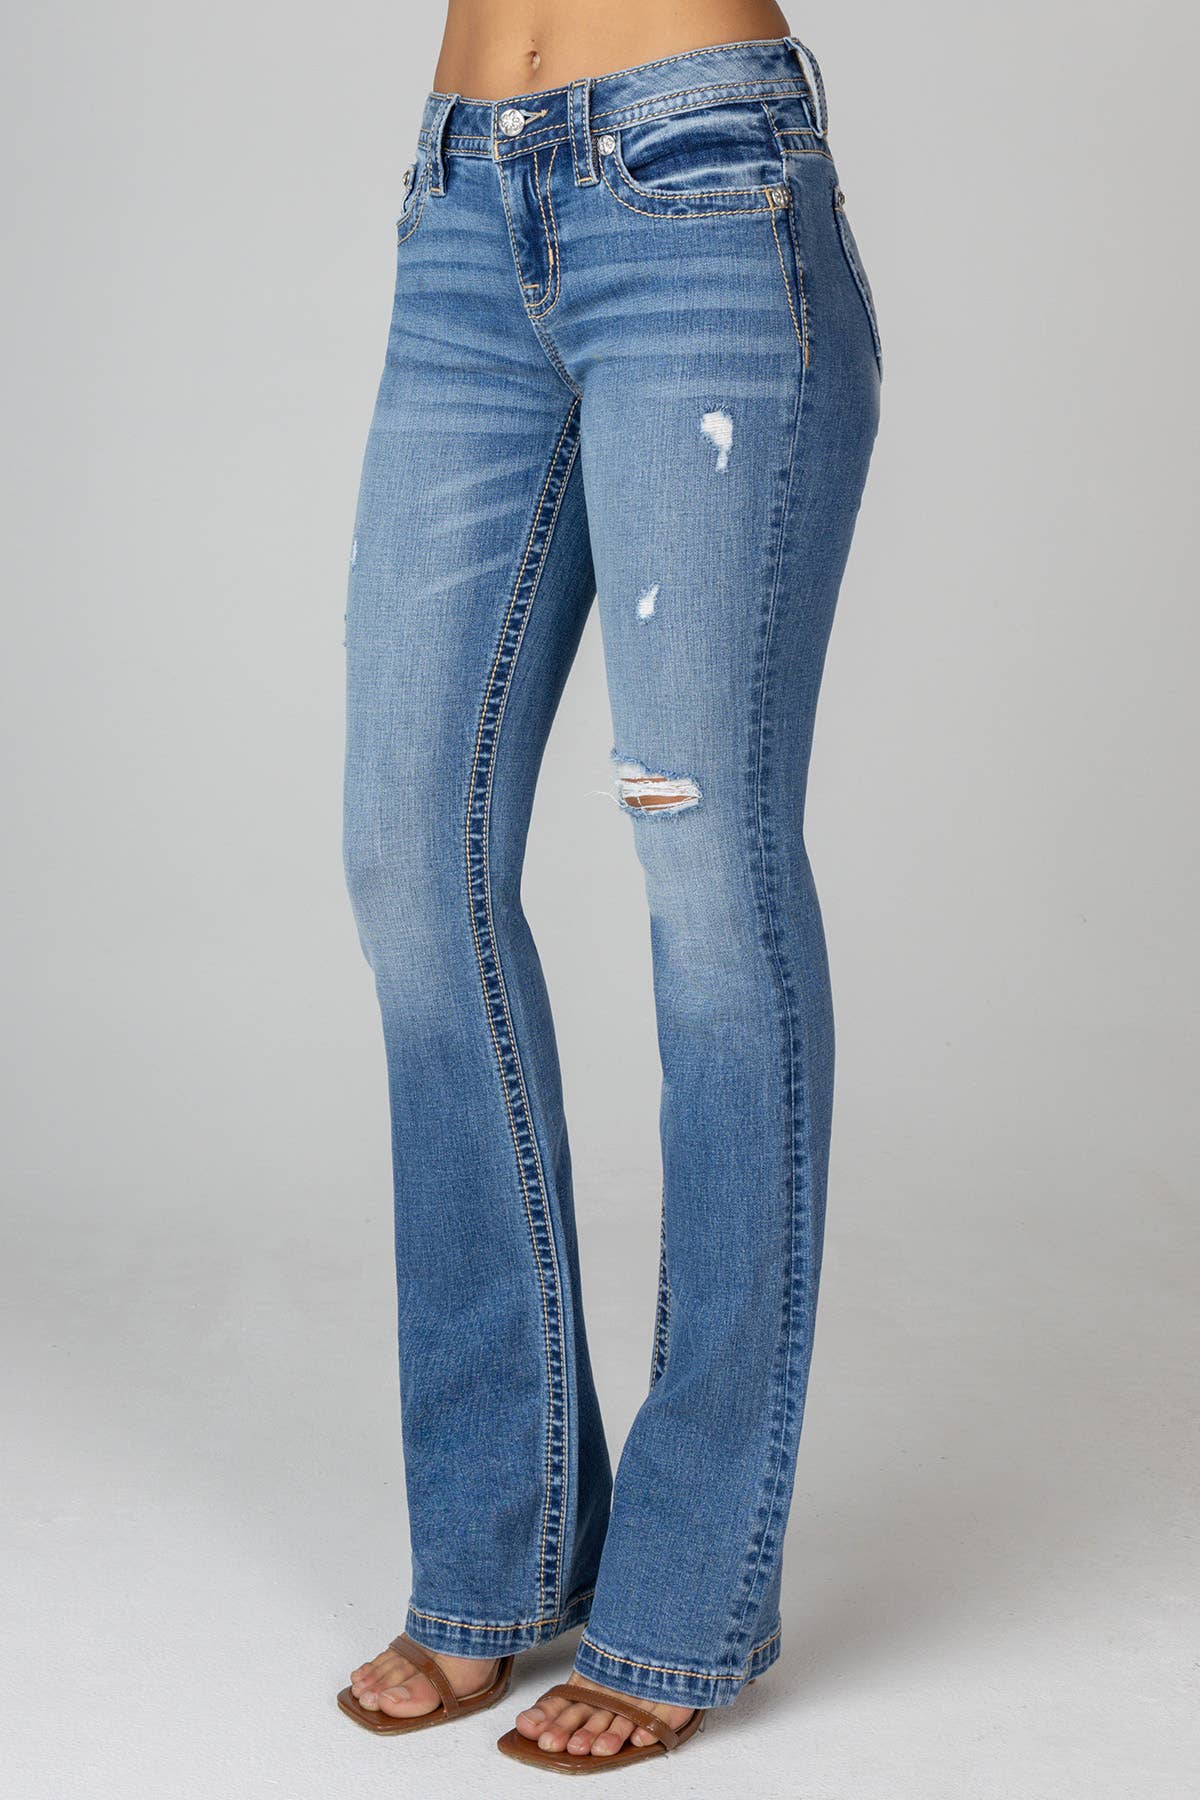 MISS ME MID-RISE BOOTCUT DISTRESSED JEAN